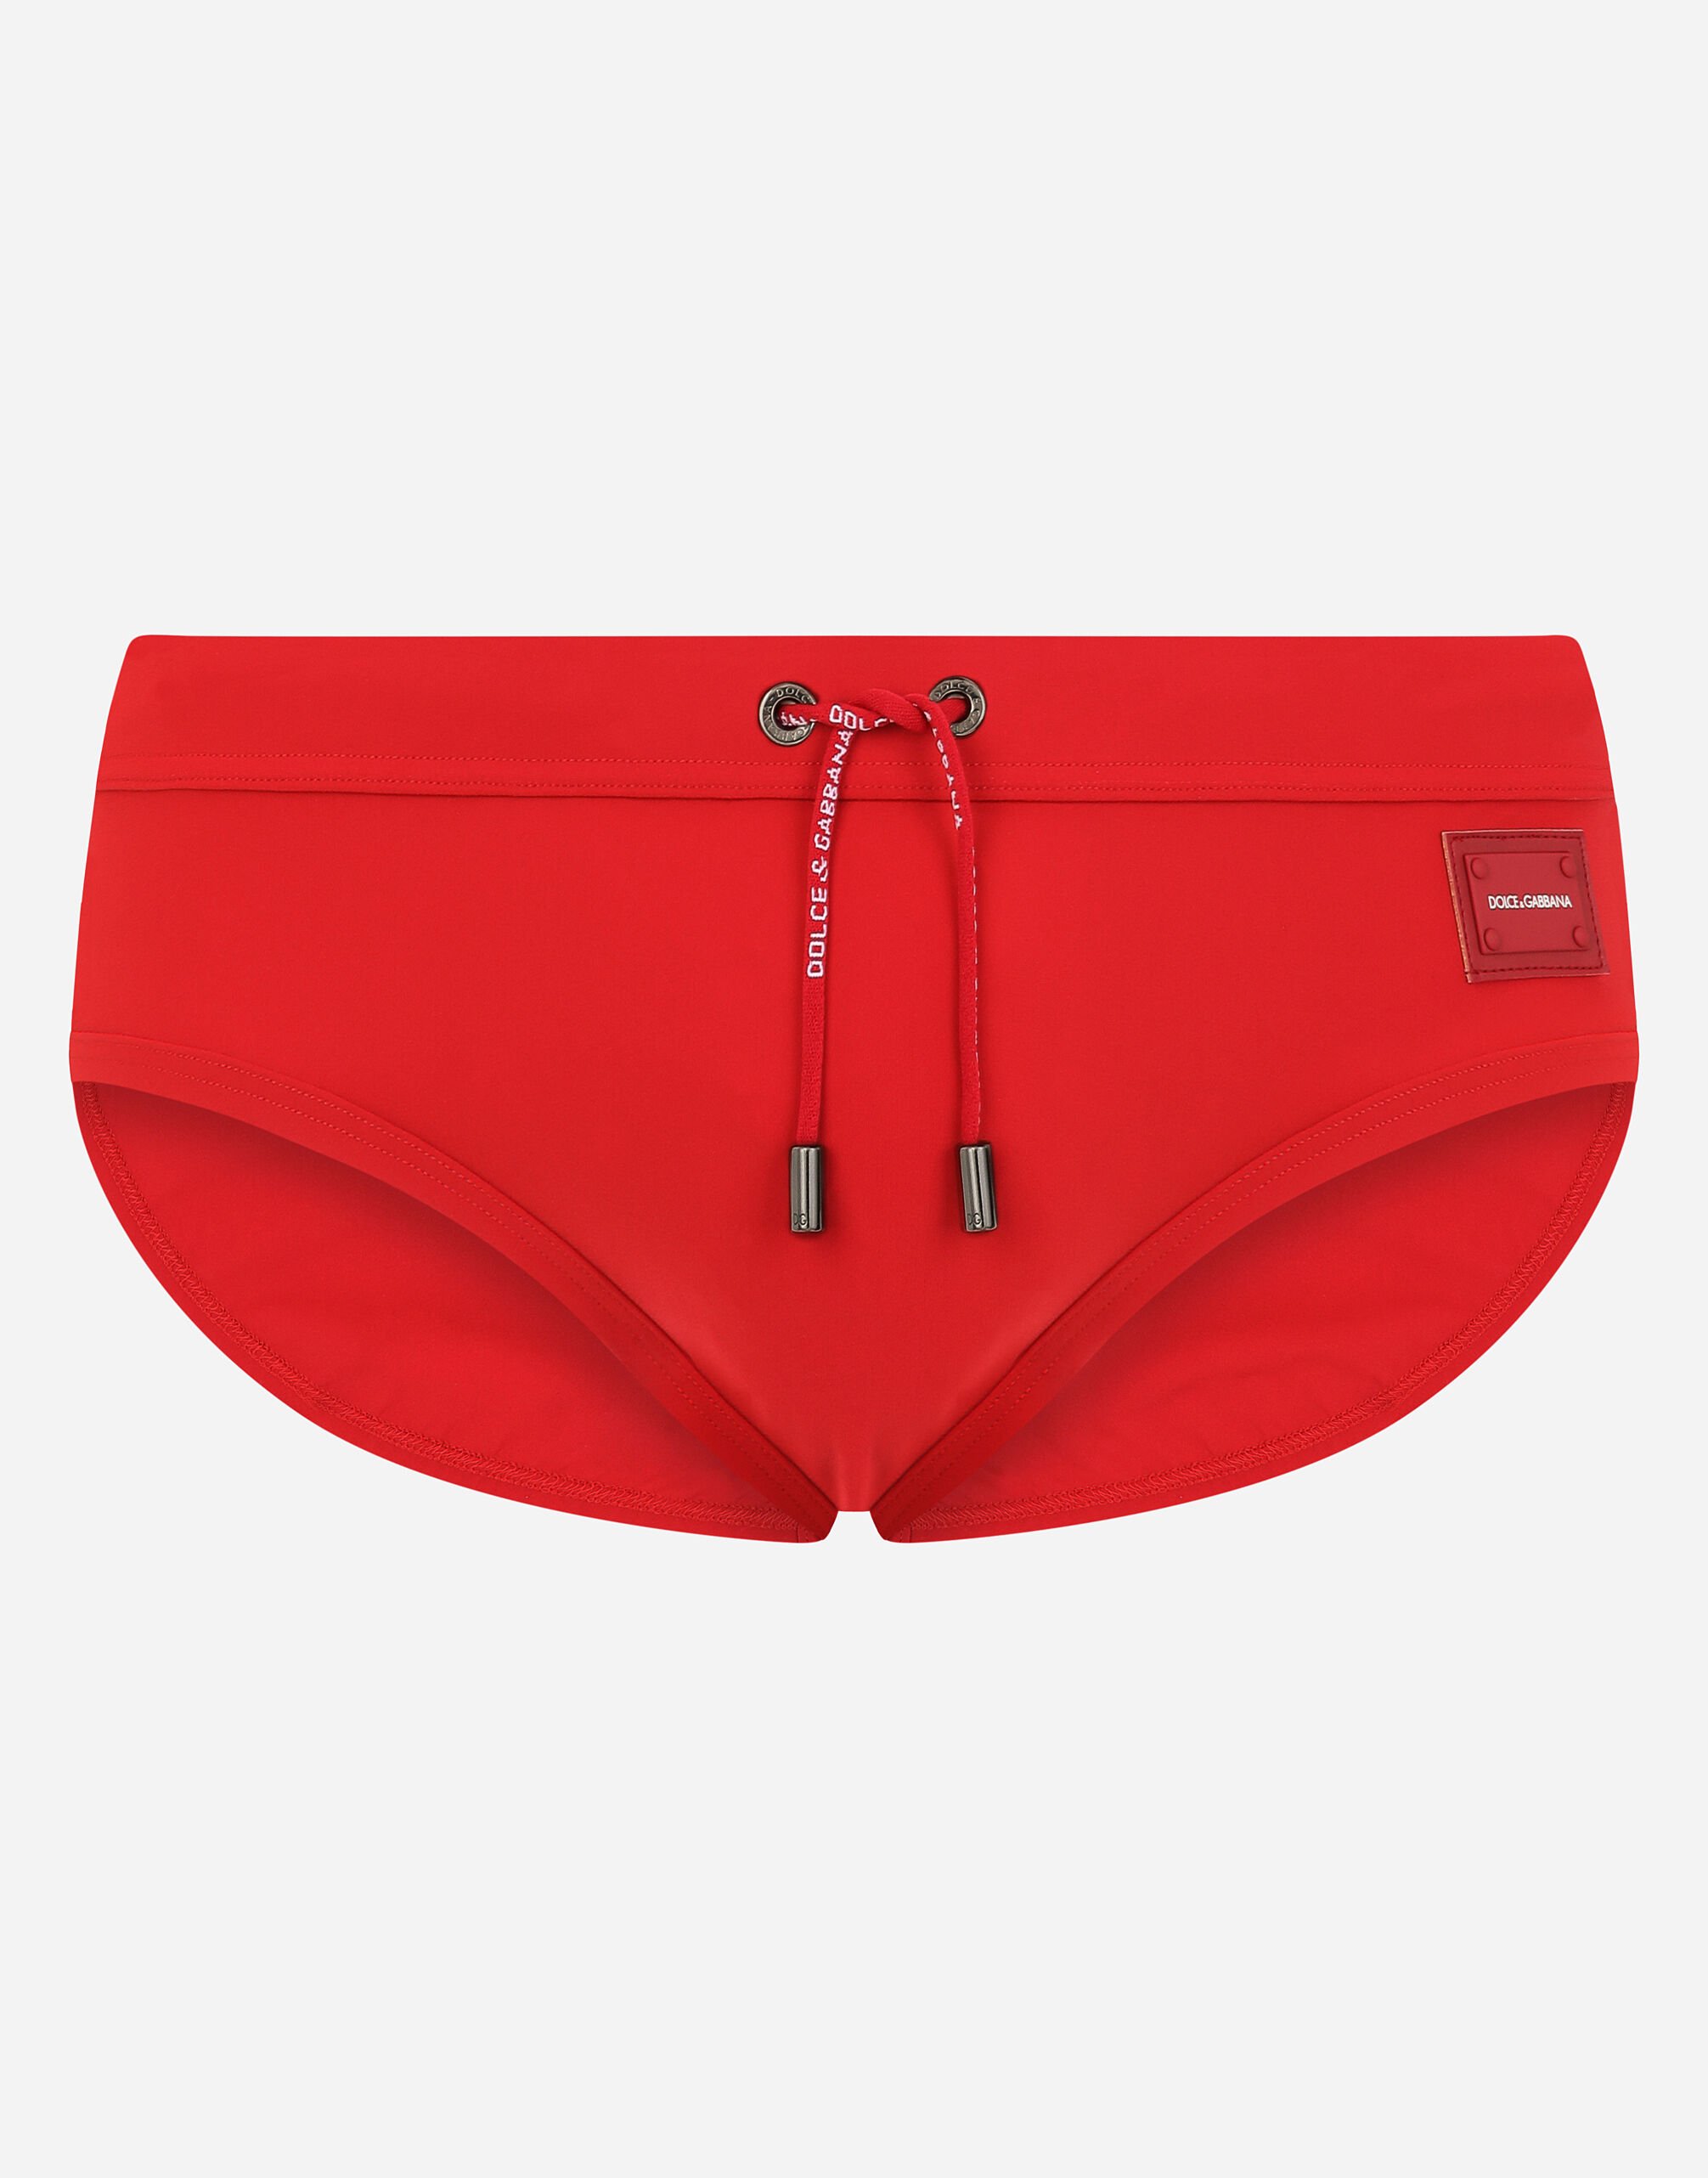 Dolce&Gabbana Swim briefs with high-cut leg and branded plate Red G5IF1THI1KW